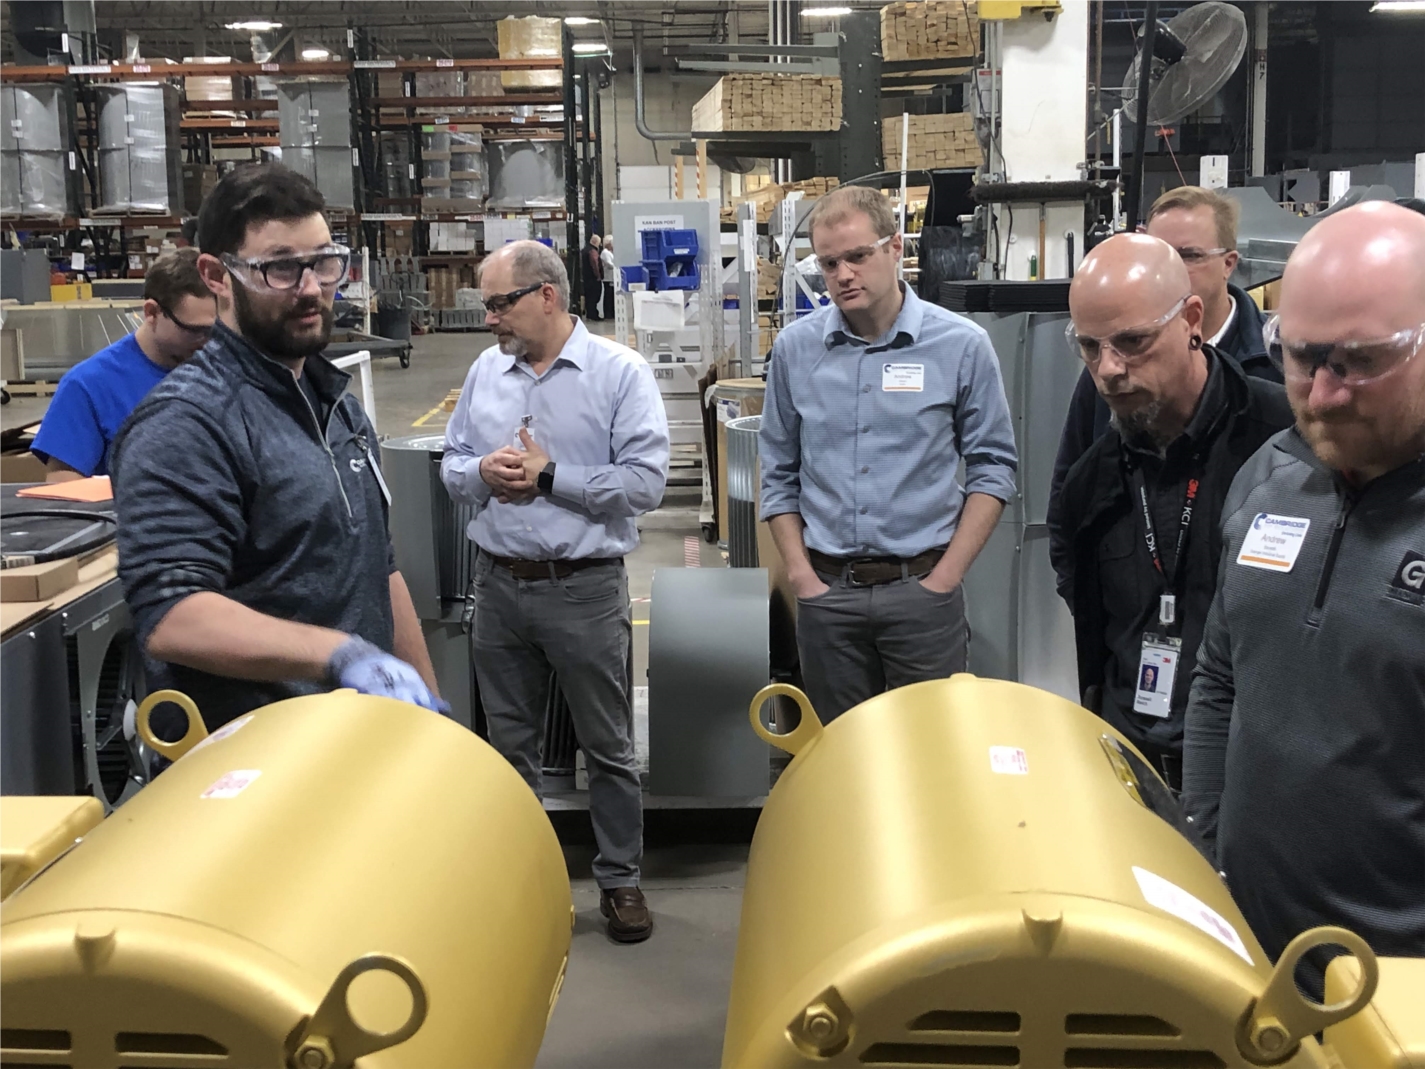 Thomas Little, from the Post-Paint line, hosts a station for visitors on the Cambridge Lean Tour. On this tour, leaders from St. Louis and across the US and world can experience what a lean culture means and the power of autonomous workers.